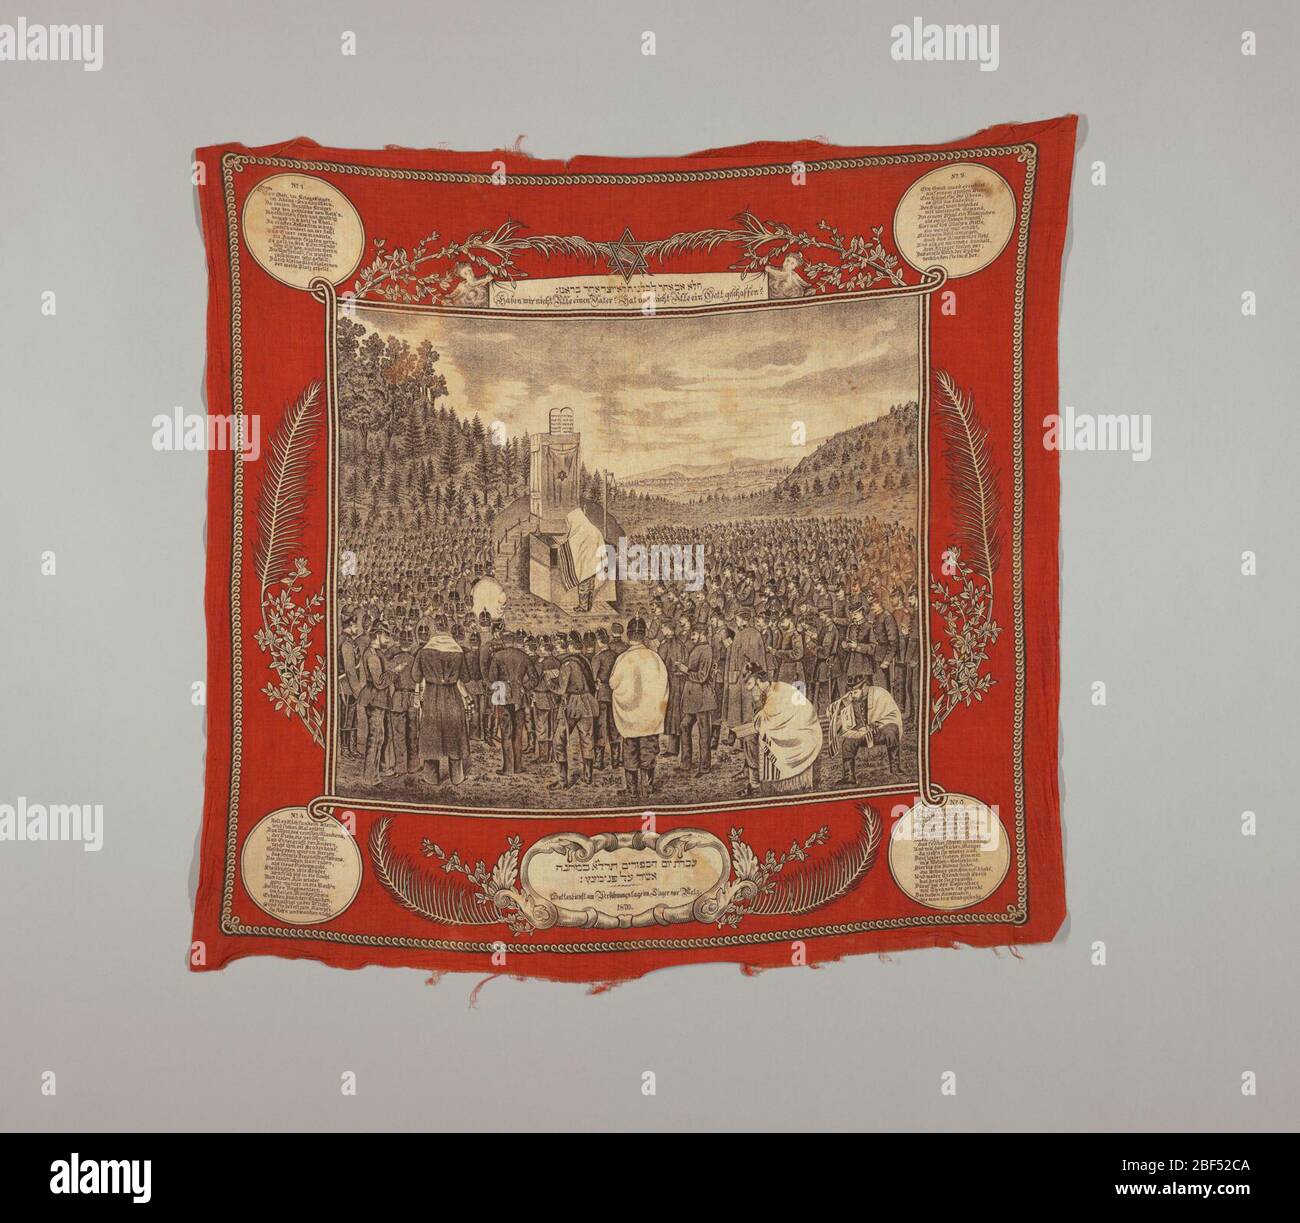 Commemorative scarf. Scarf with central picture of a Jewish Kol Nidre ceremony on a corner of a battlefield. Individual regiments can be identified by numbers on the epaulettes. Text in Hebrew and German. Stock Photo